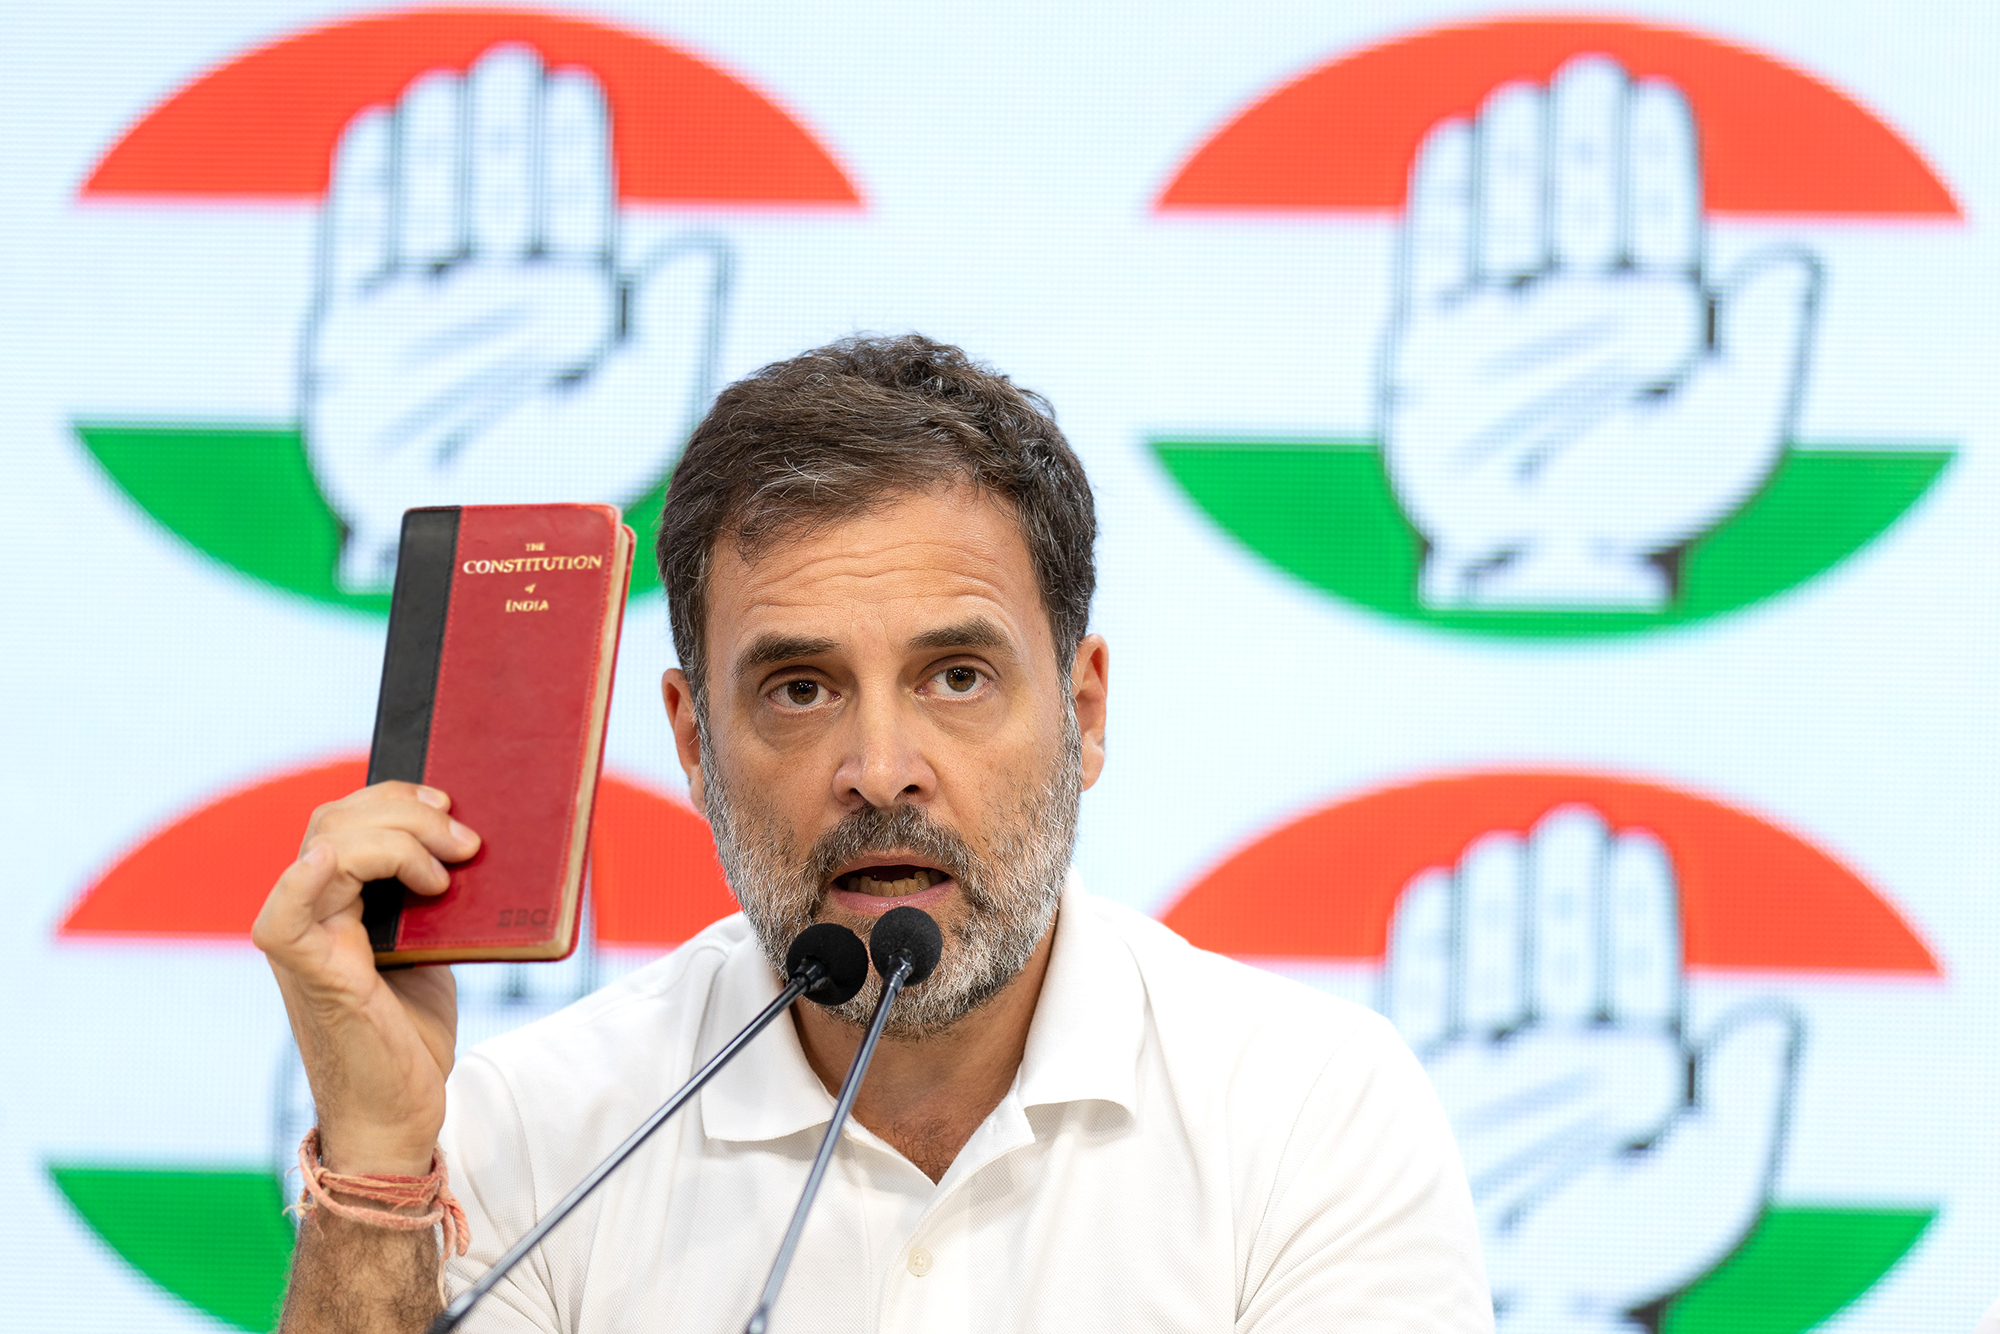 Rahul Gandhi, India's opposition leader, speaks during a news conference at the Indian National Congress headquarters during election results night in New Delhi, India, on June 4.